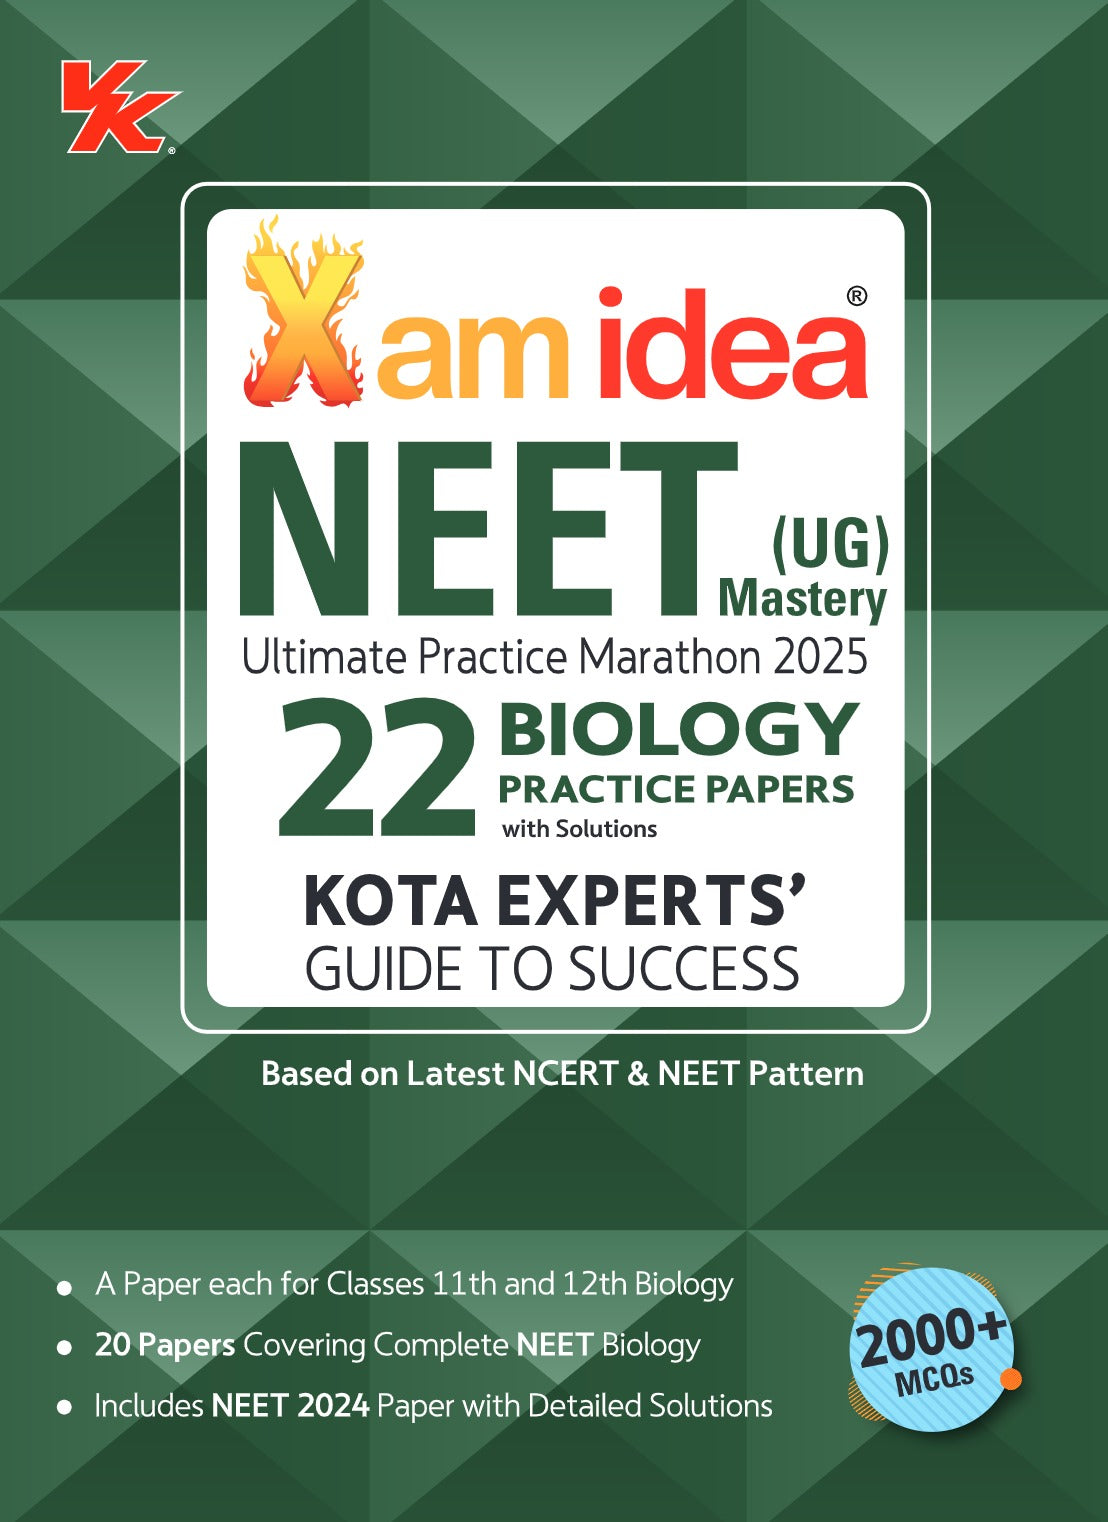 Xam Idea NEET (UG) 22 Biology Practice Papers with Solutions by Kota Experts for 2025 Examination